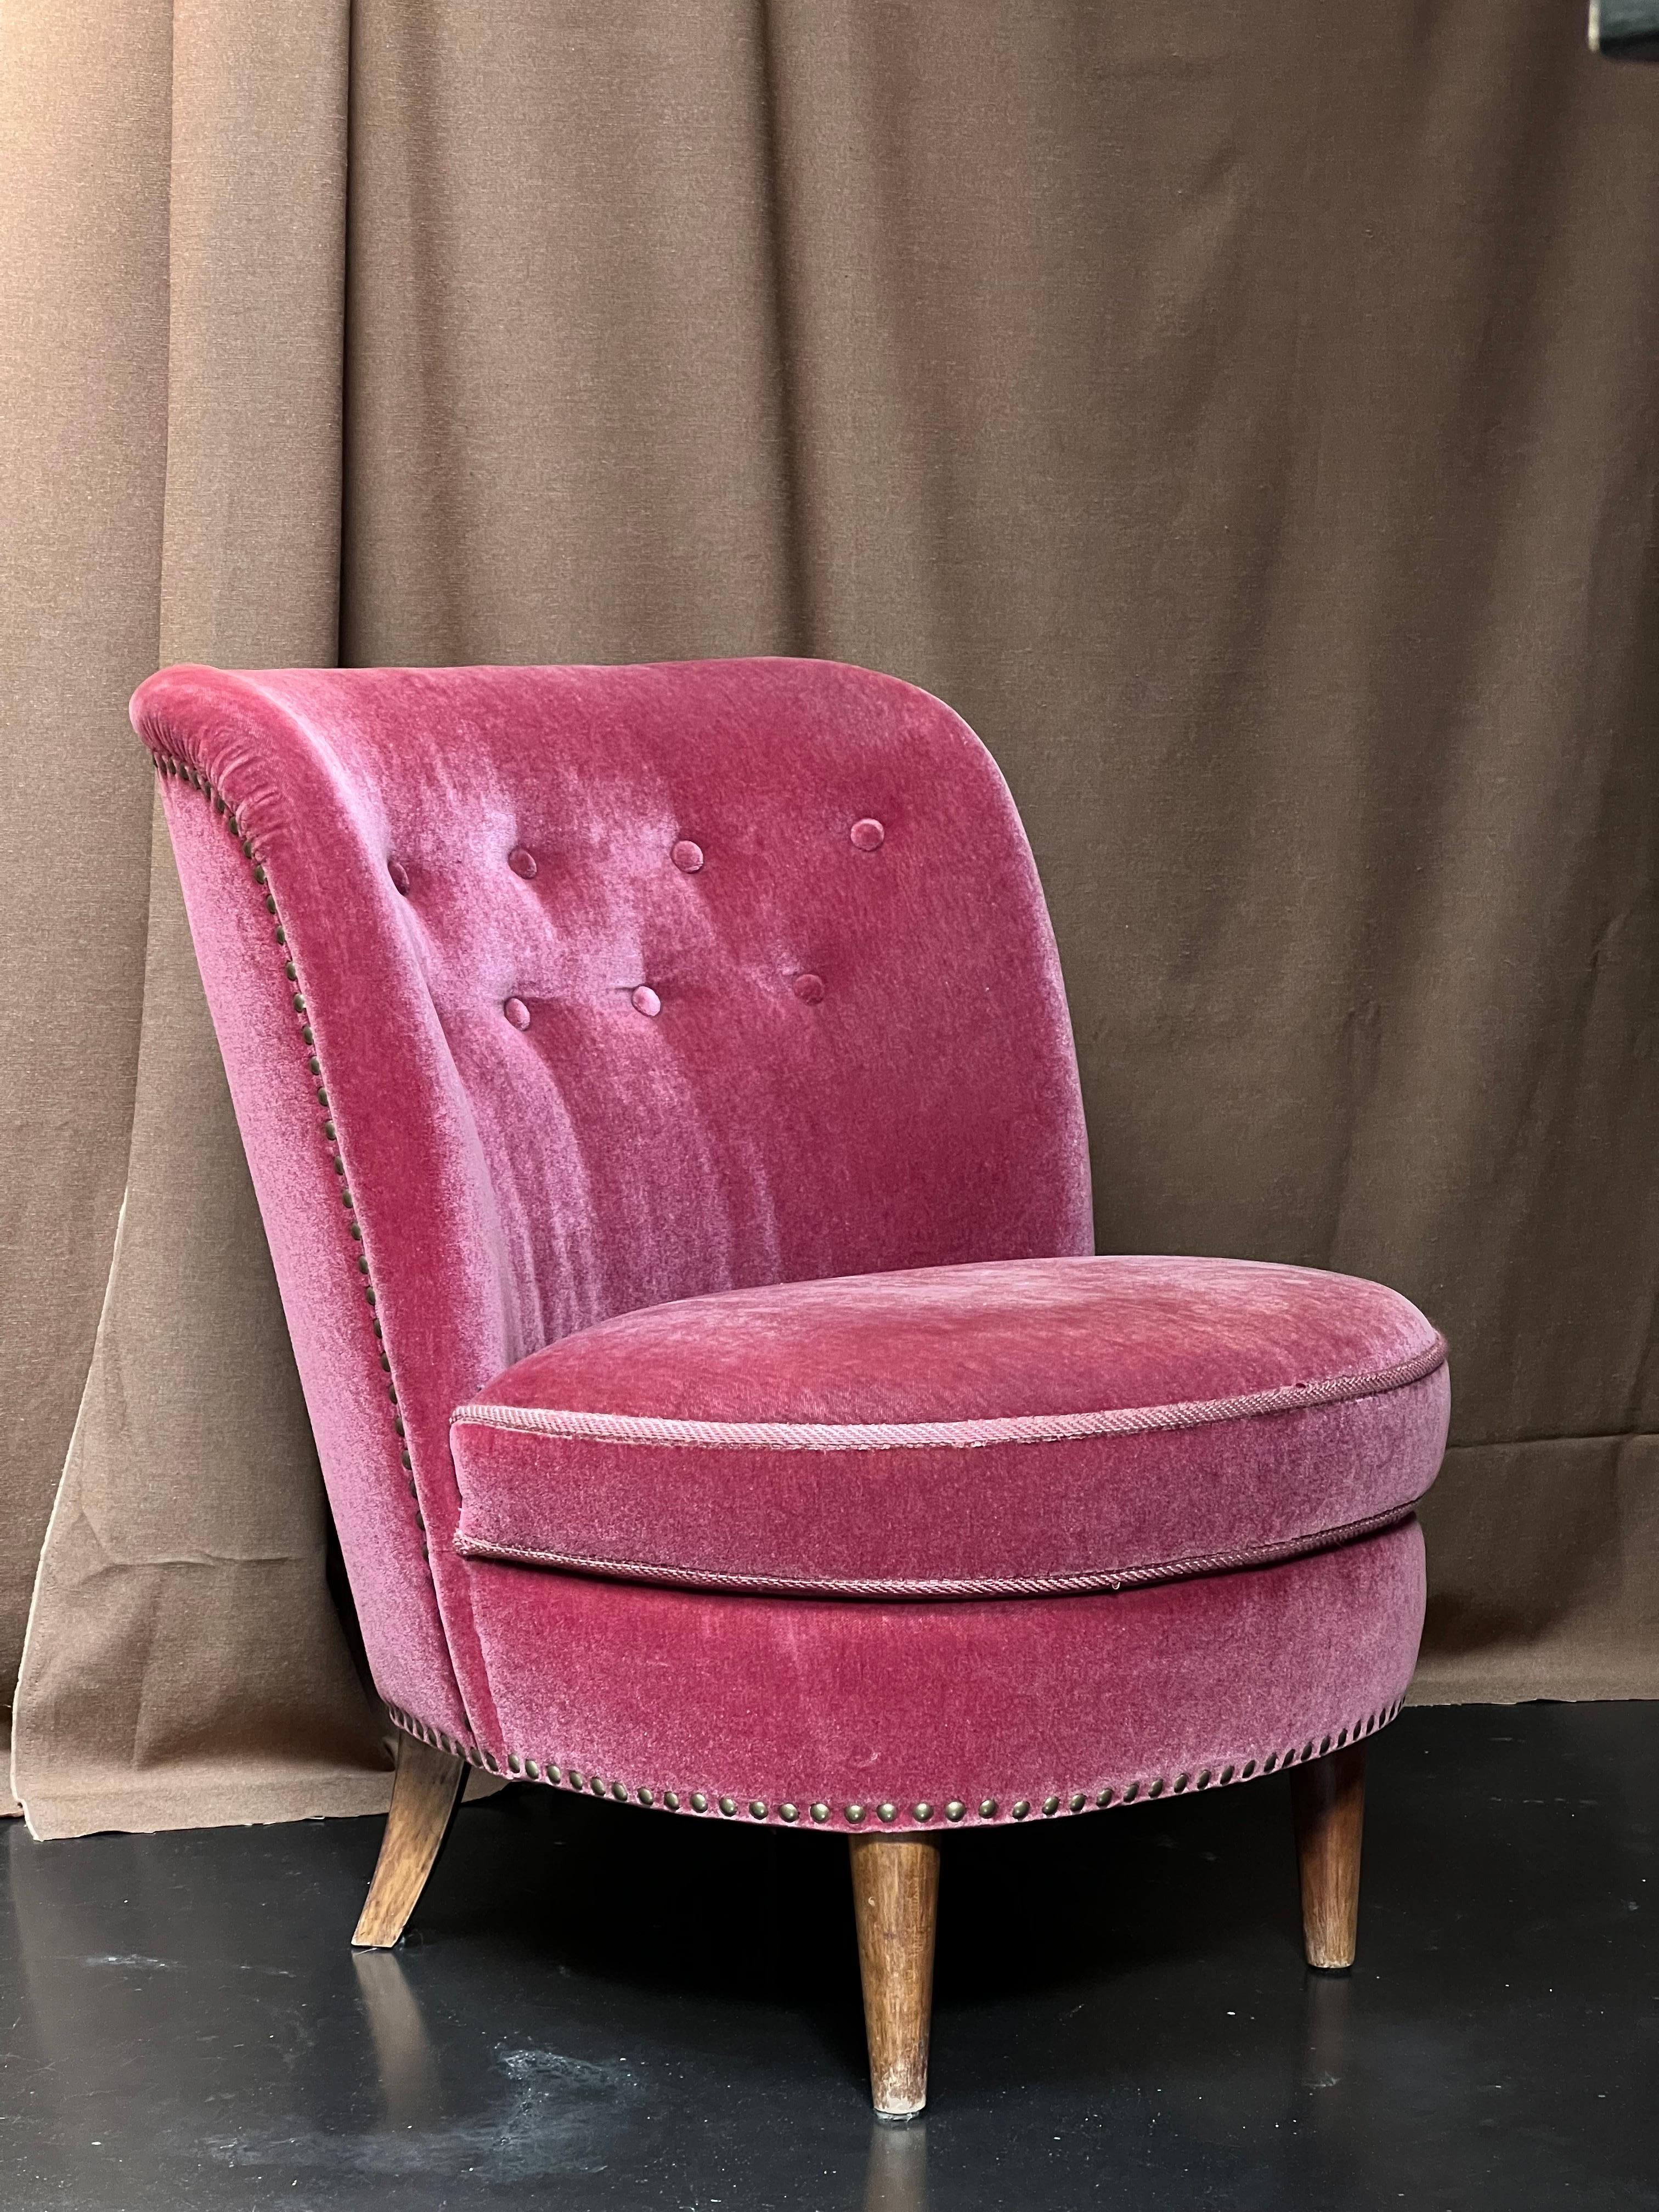 Scandinavian Modern Swedish Grace Pink Mohair and Brass Nails Chauffeuse, Sweden, 1930s For Sale